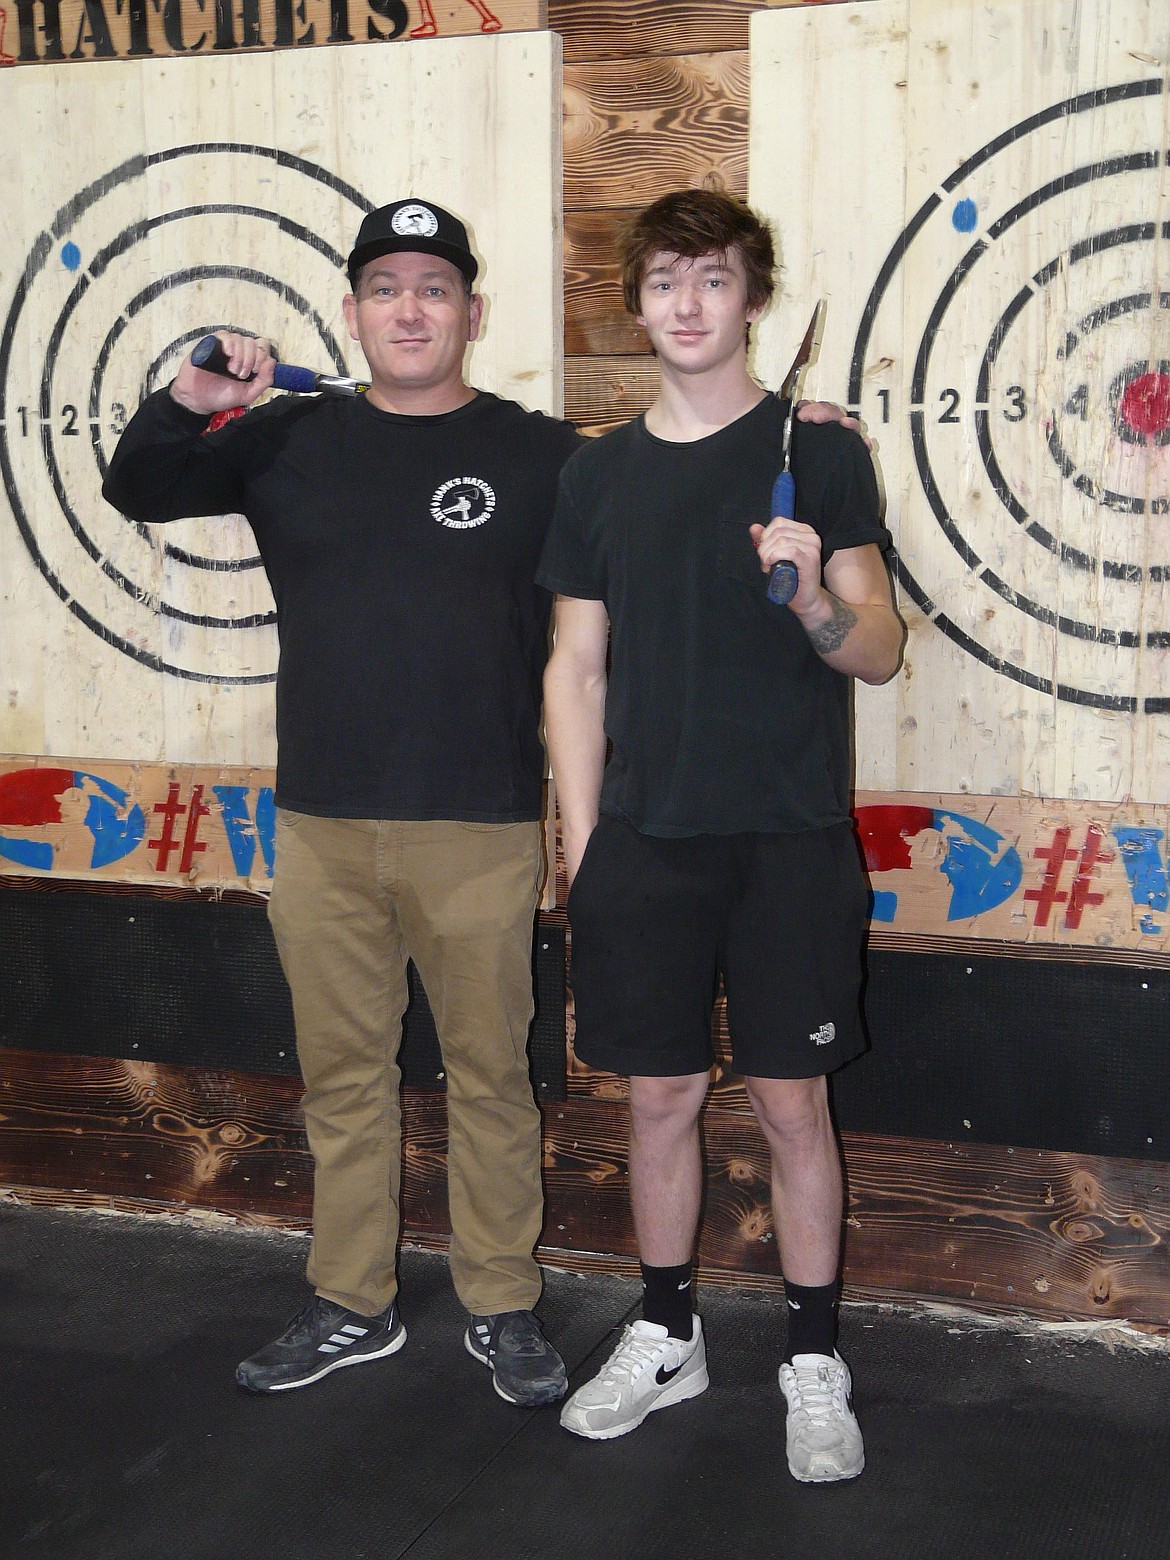 Owners Jared (Hank) D'Andrea and son Ezra Evans are seen at Hank's Hatchets, a new indoor ax-throwing venue that will open Friday at 2506 N. Fourth St., Coeur d'Alene.